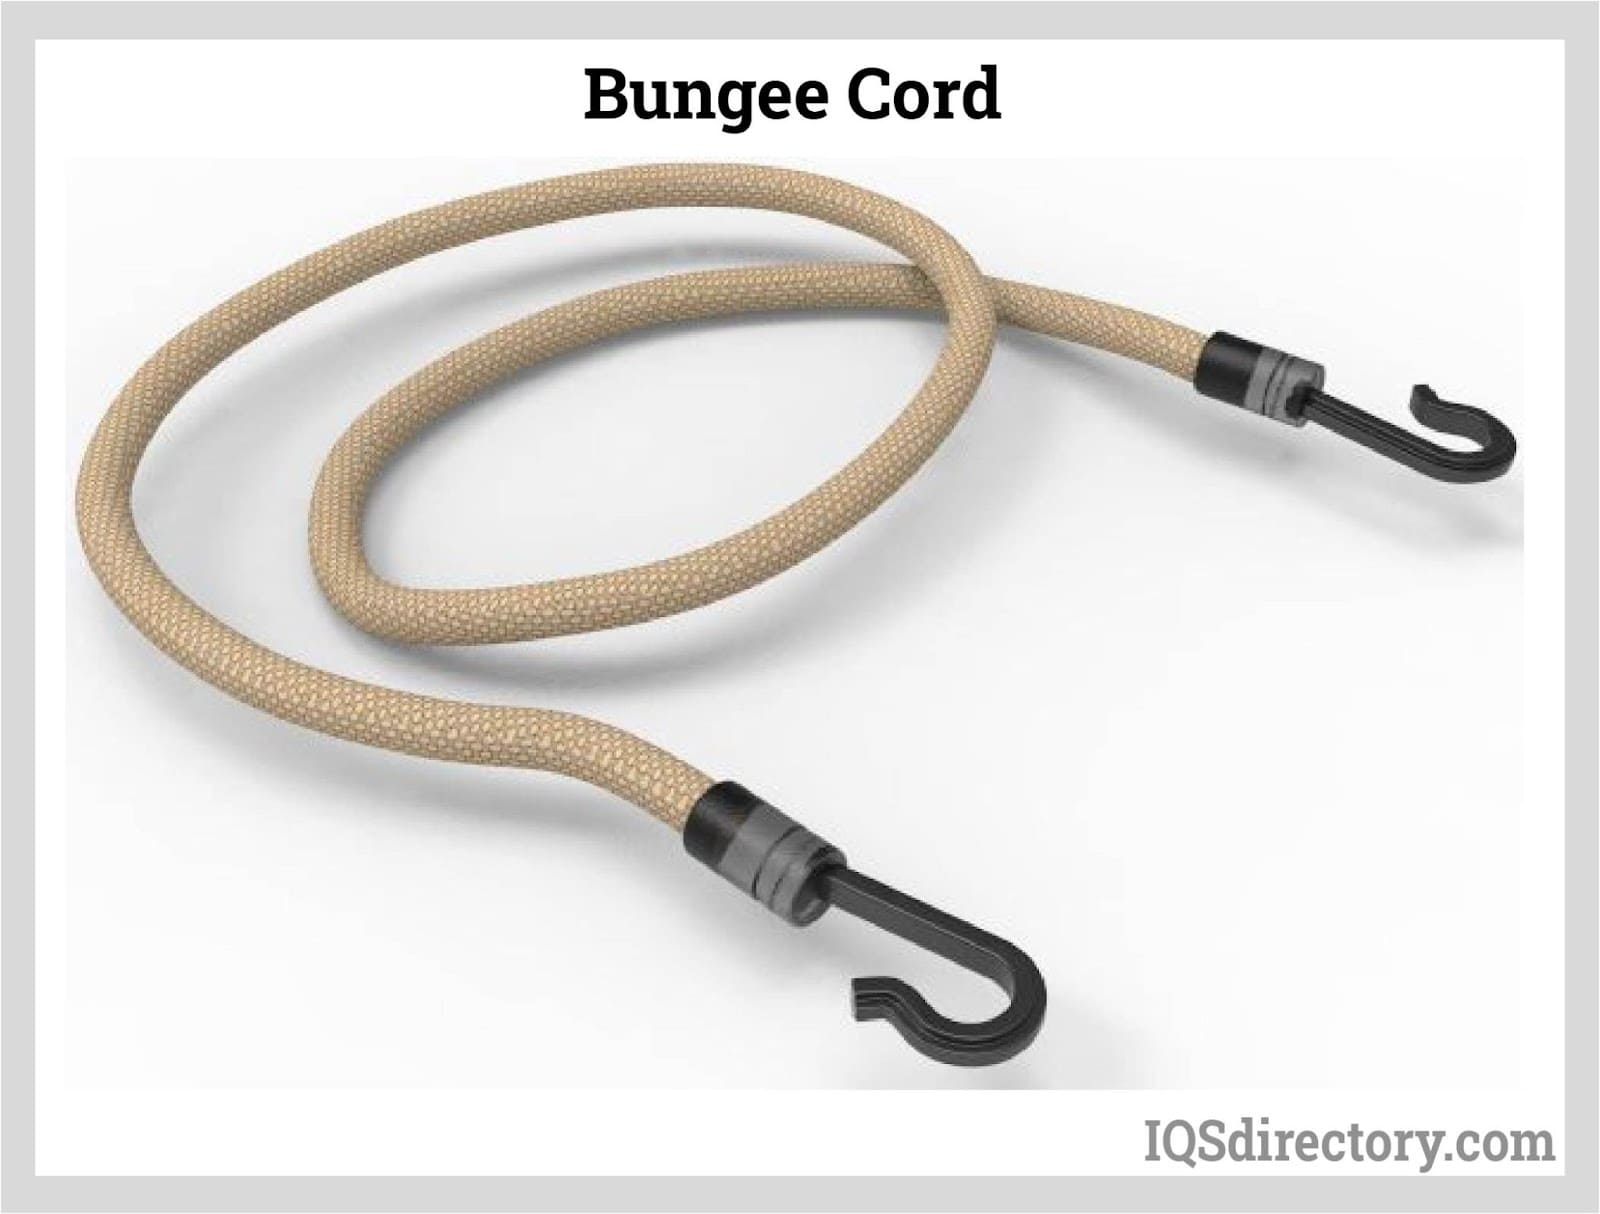 https://www.iqsdirectory.com/articles/rope-supplier/bungee-cord/bungee-cord.jpg